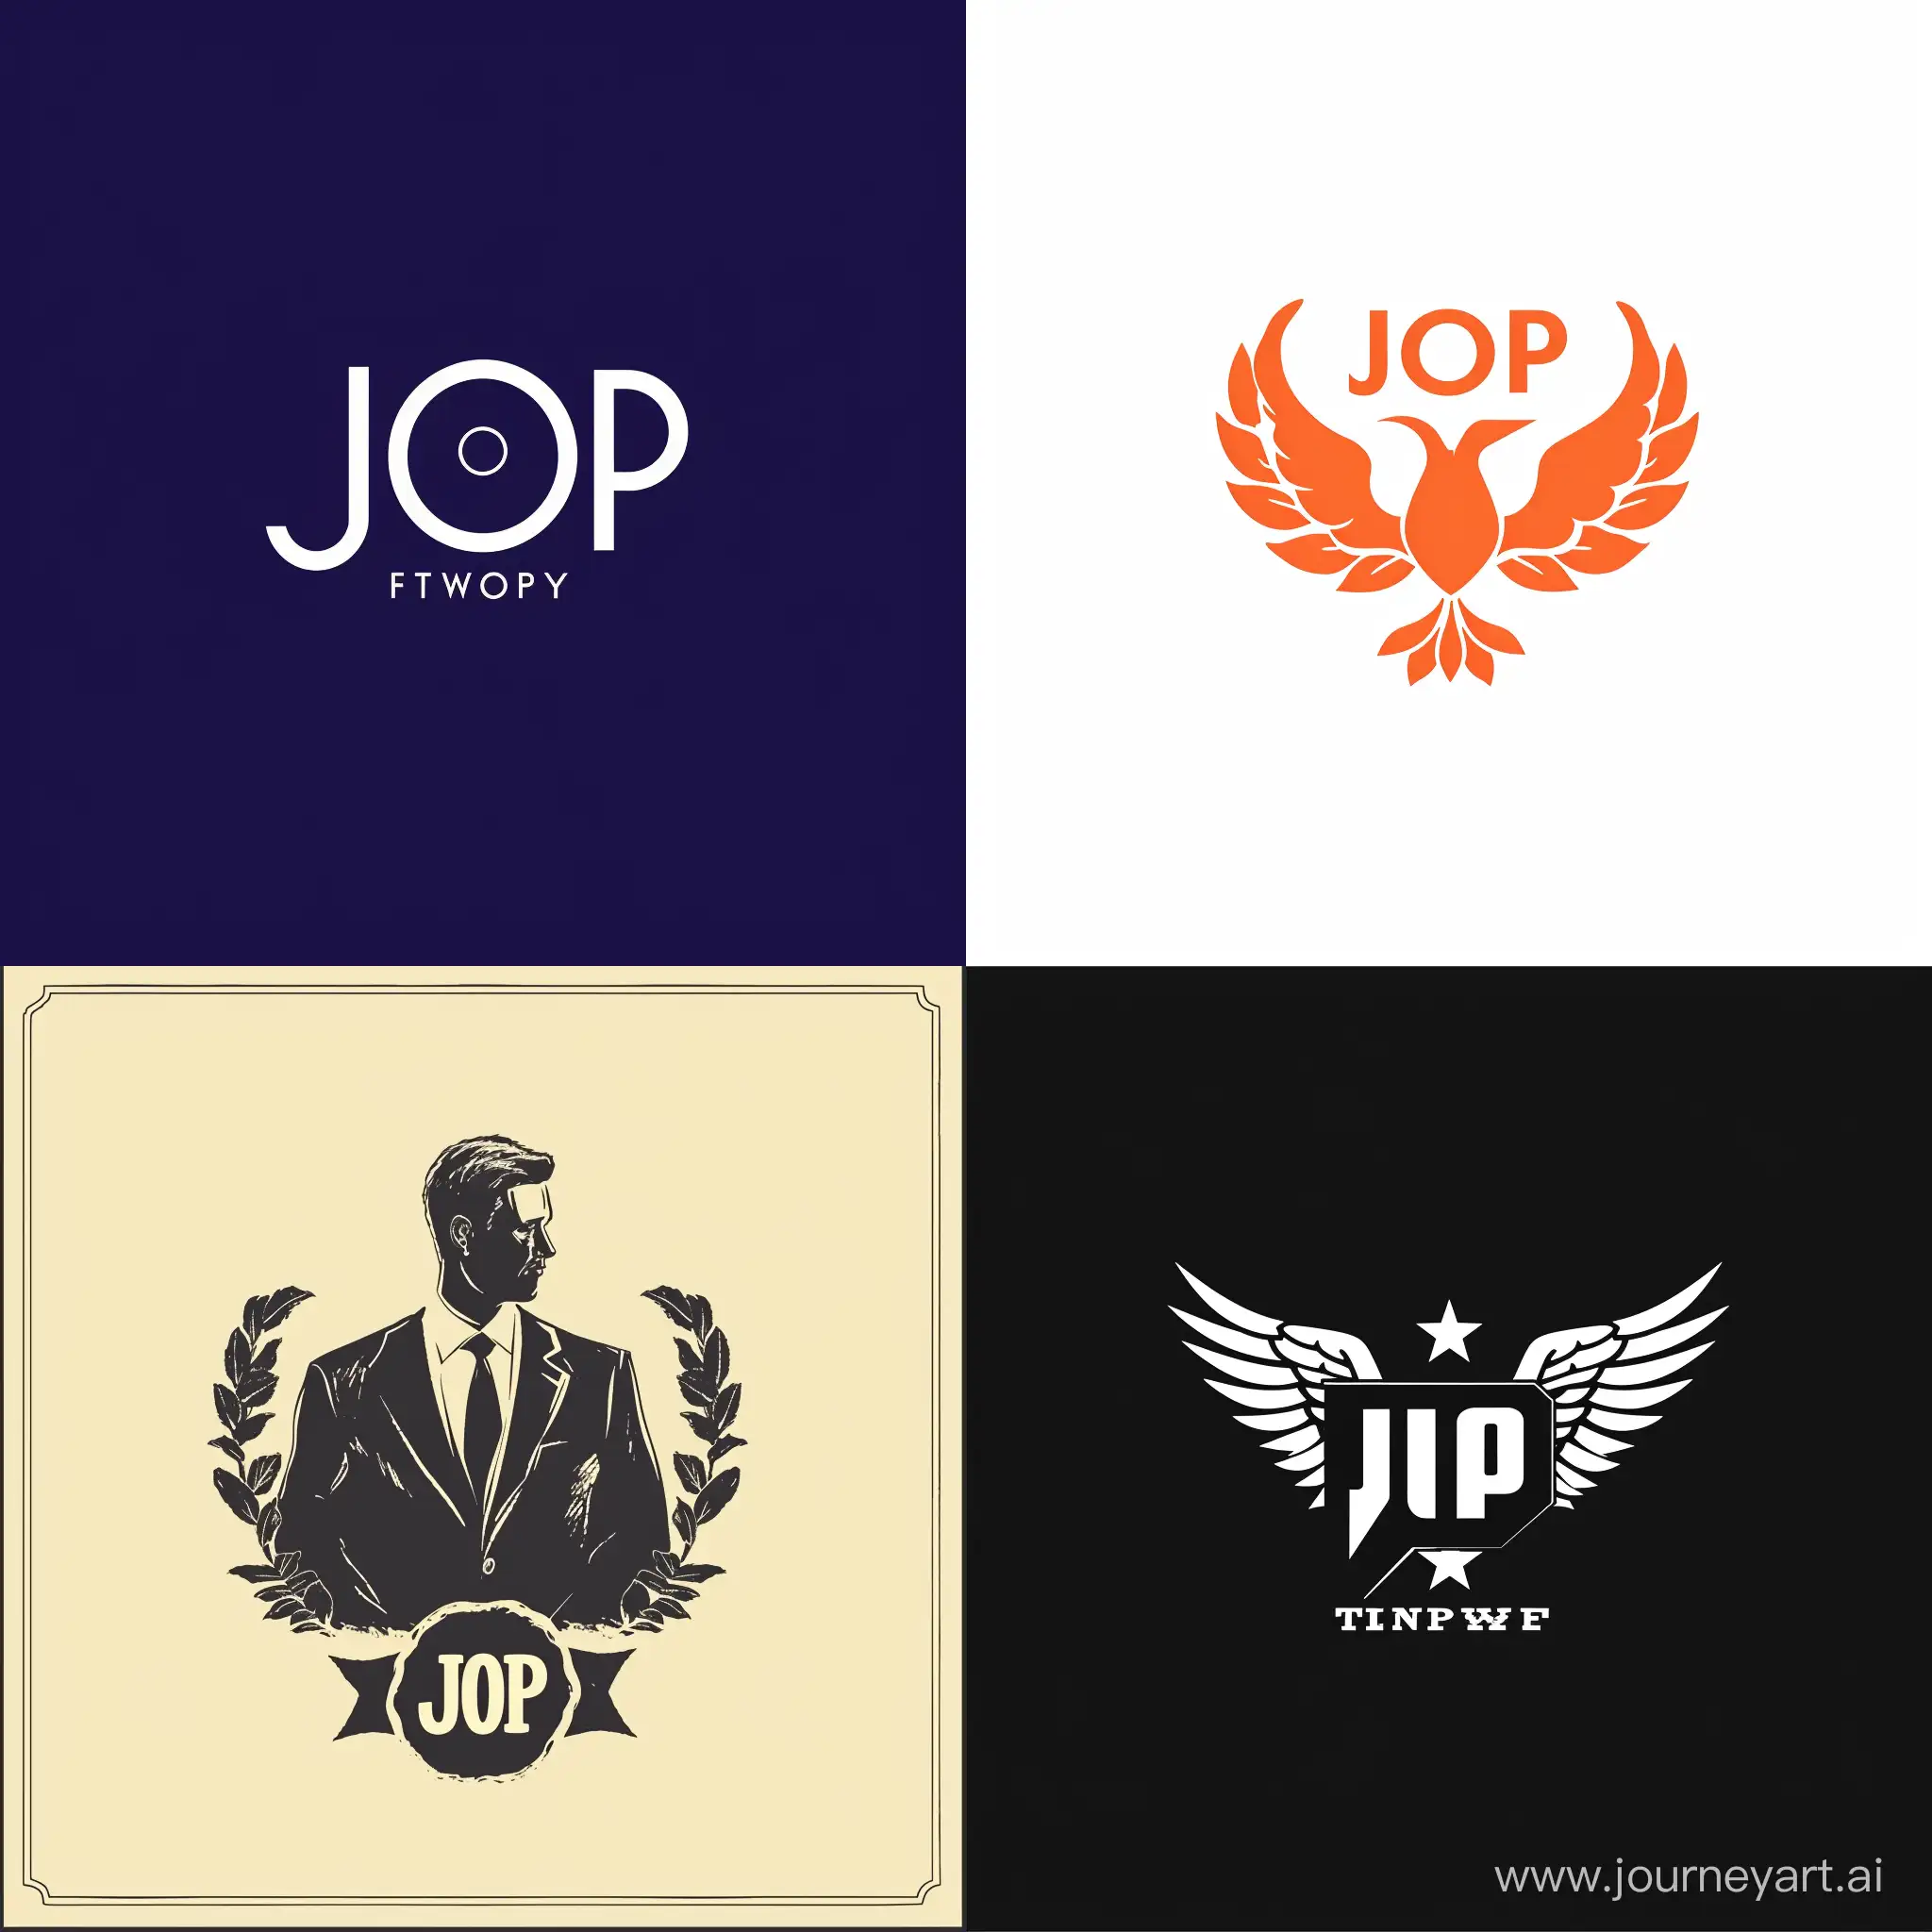 Provide additional details or specifications for the logo you envision for the political party named JOP, emphasizing support for young entrepreneurs.